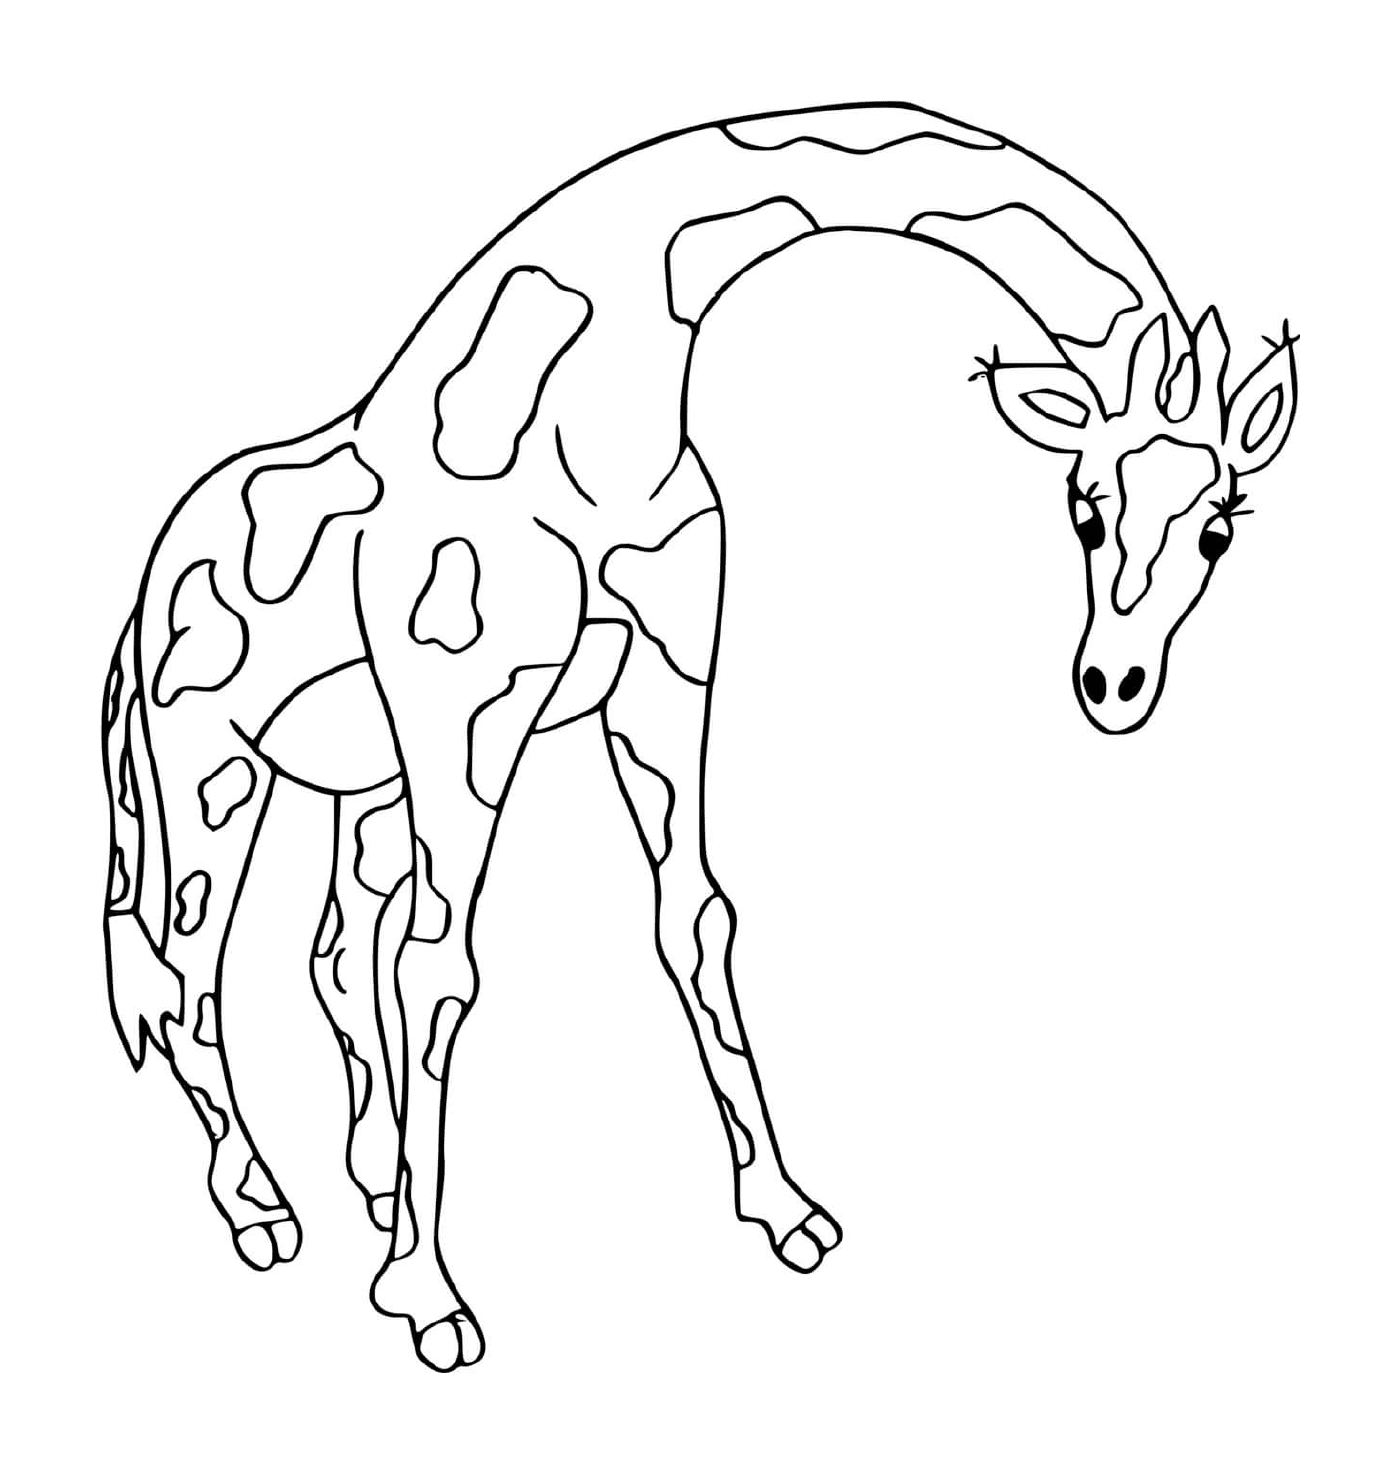  Girafe with rounded neck 